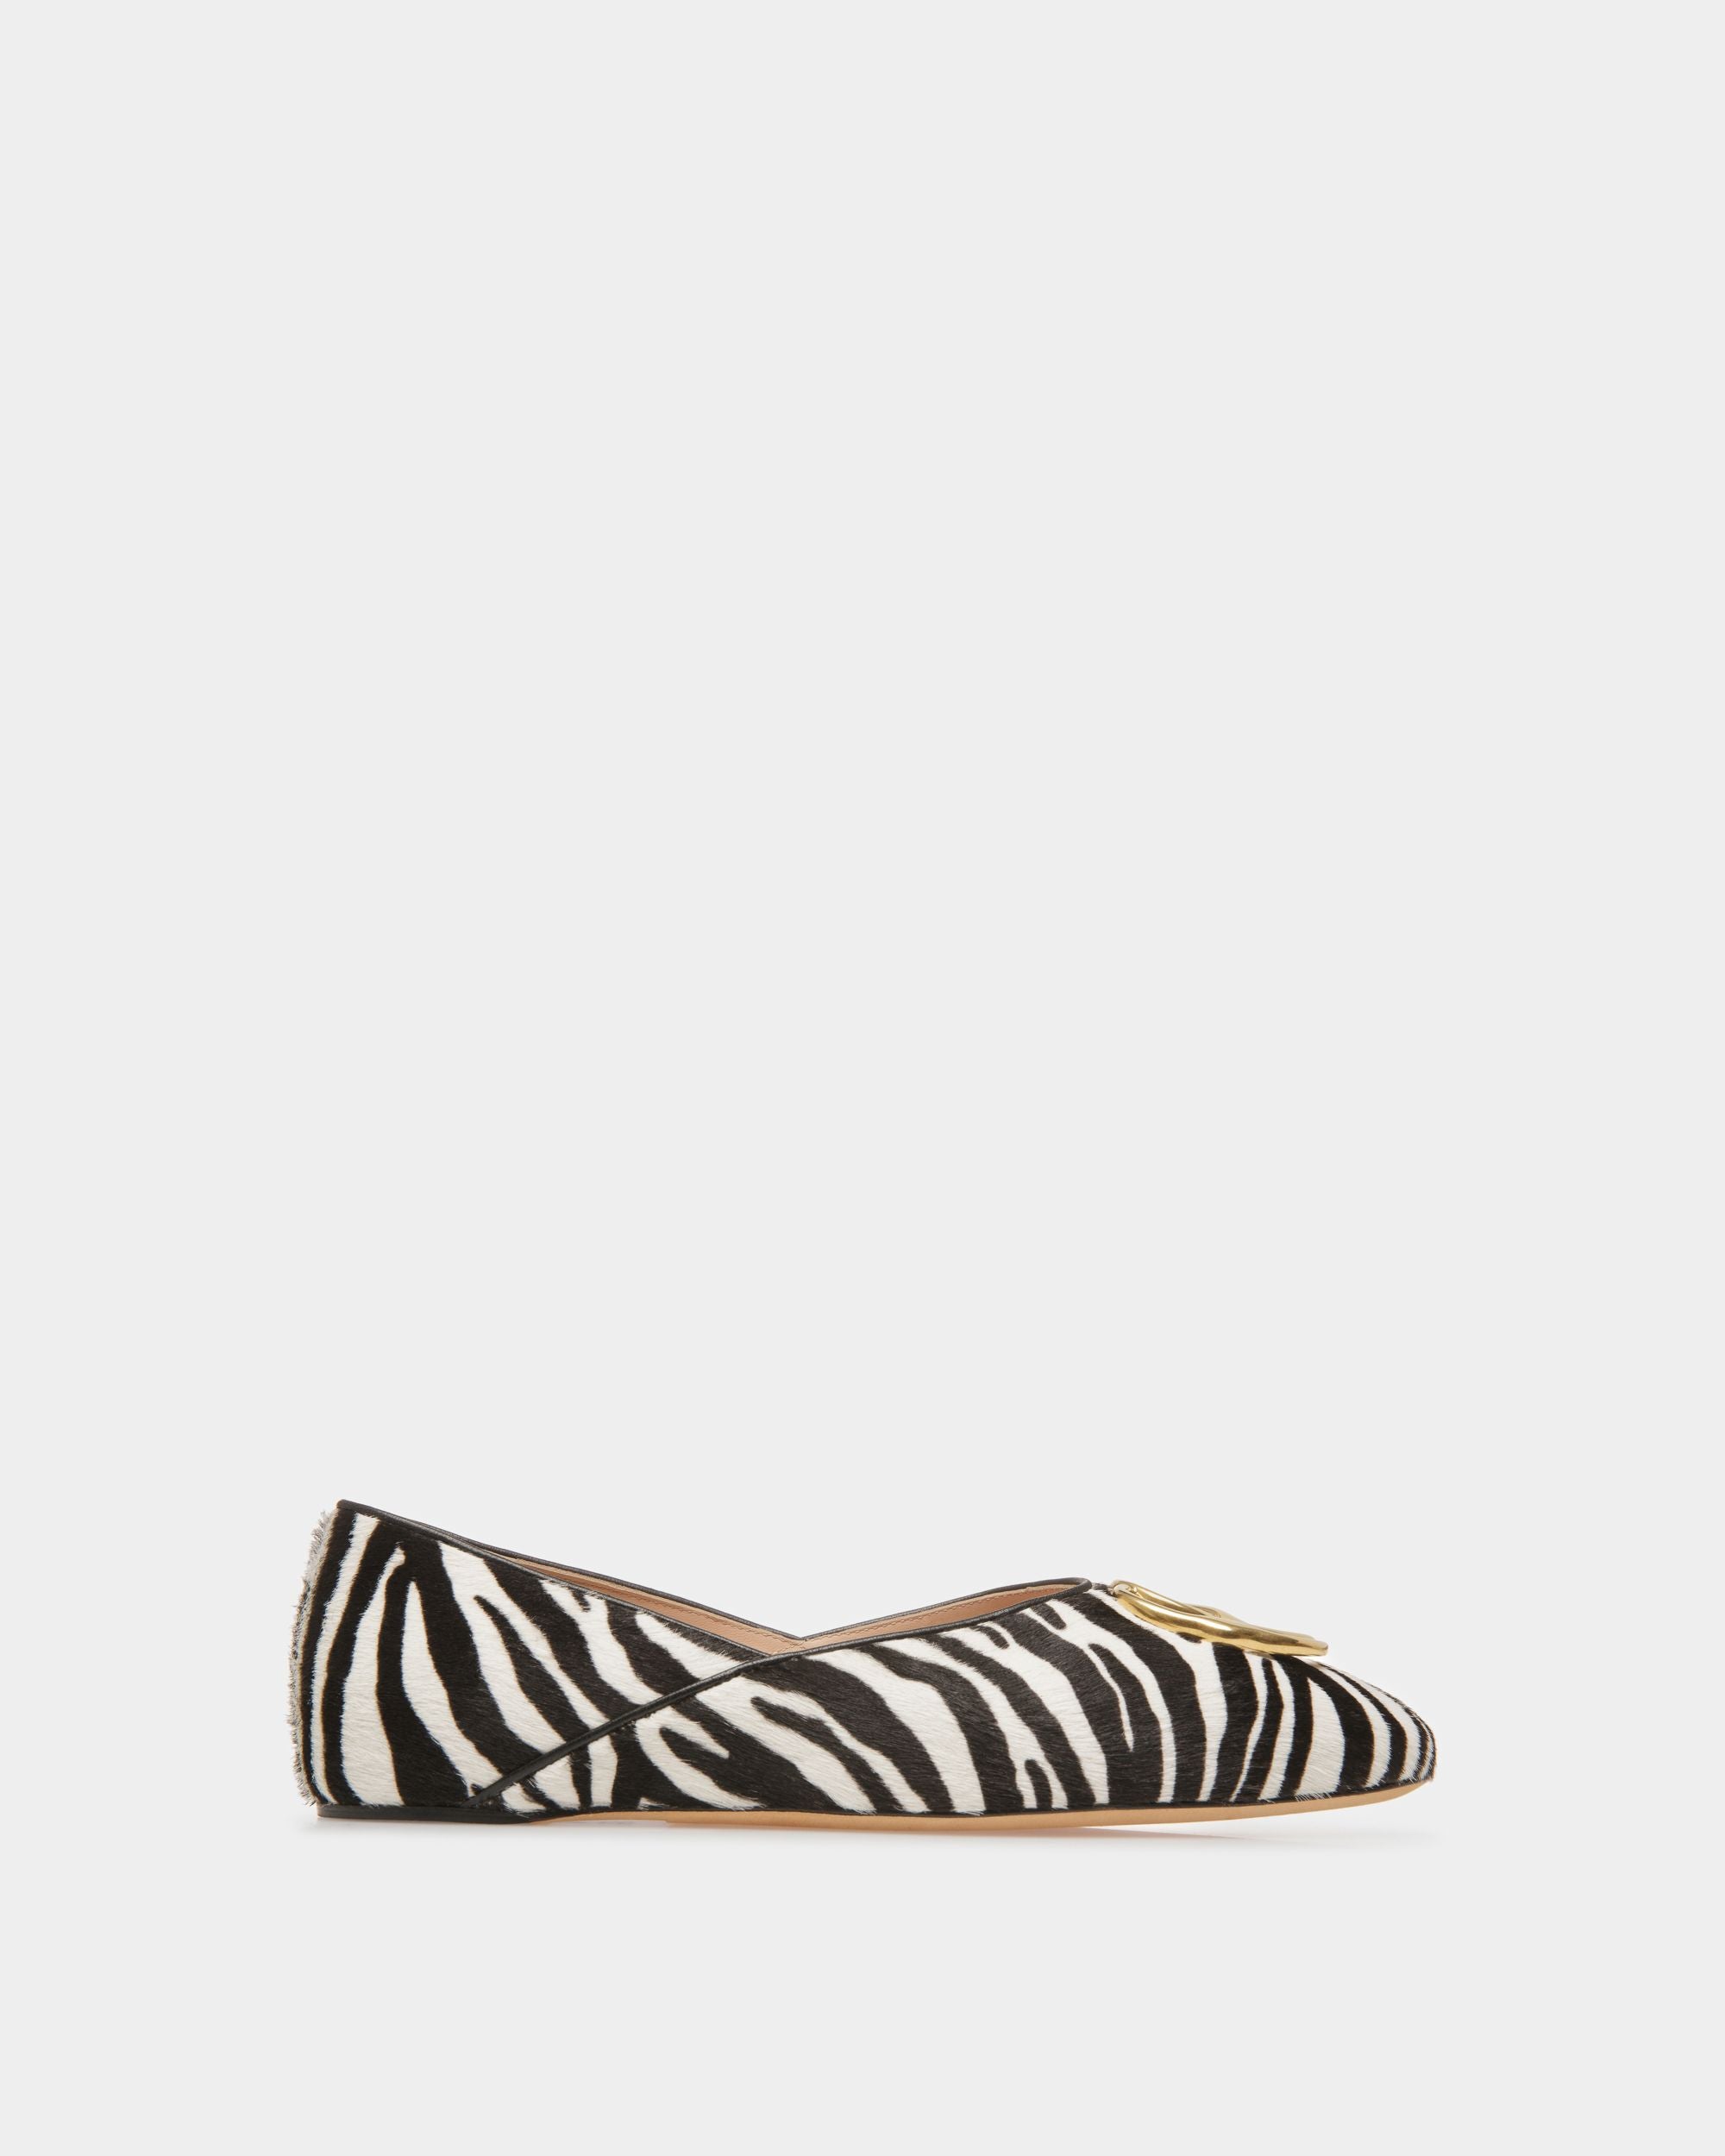 Gerry | Women's Flats | Black And White Leather | Bally | Still Life Side